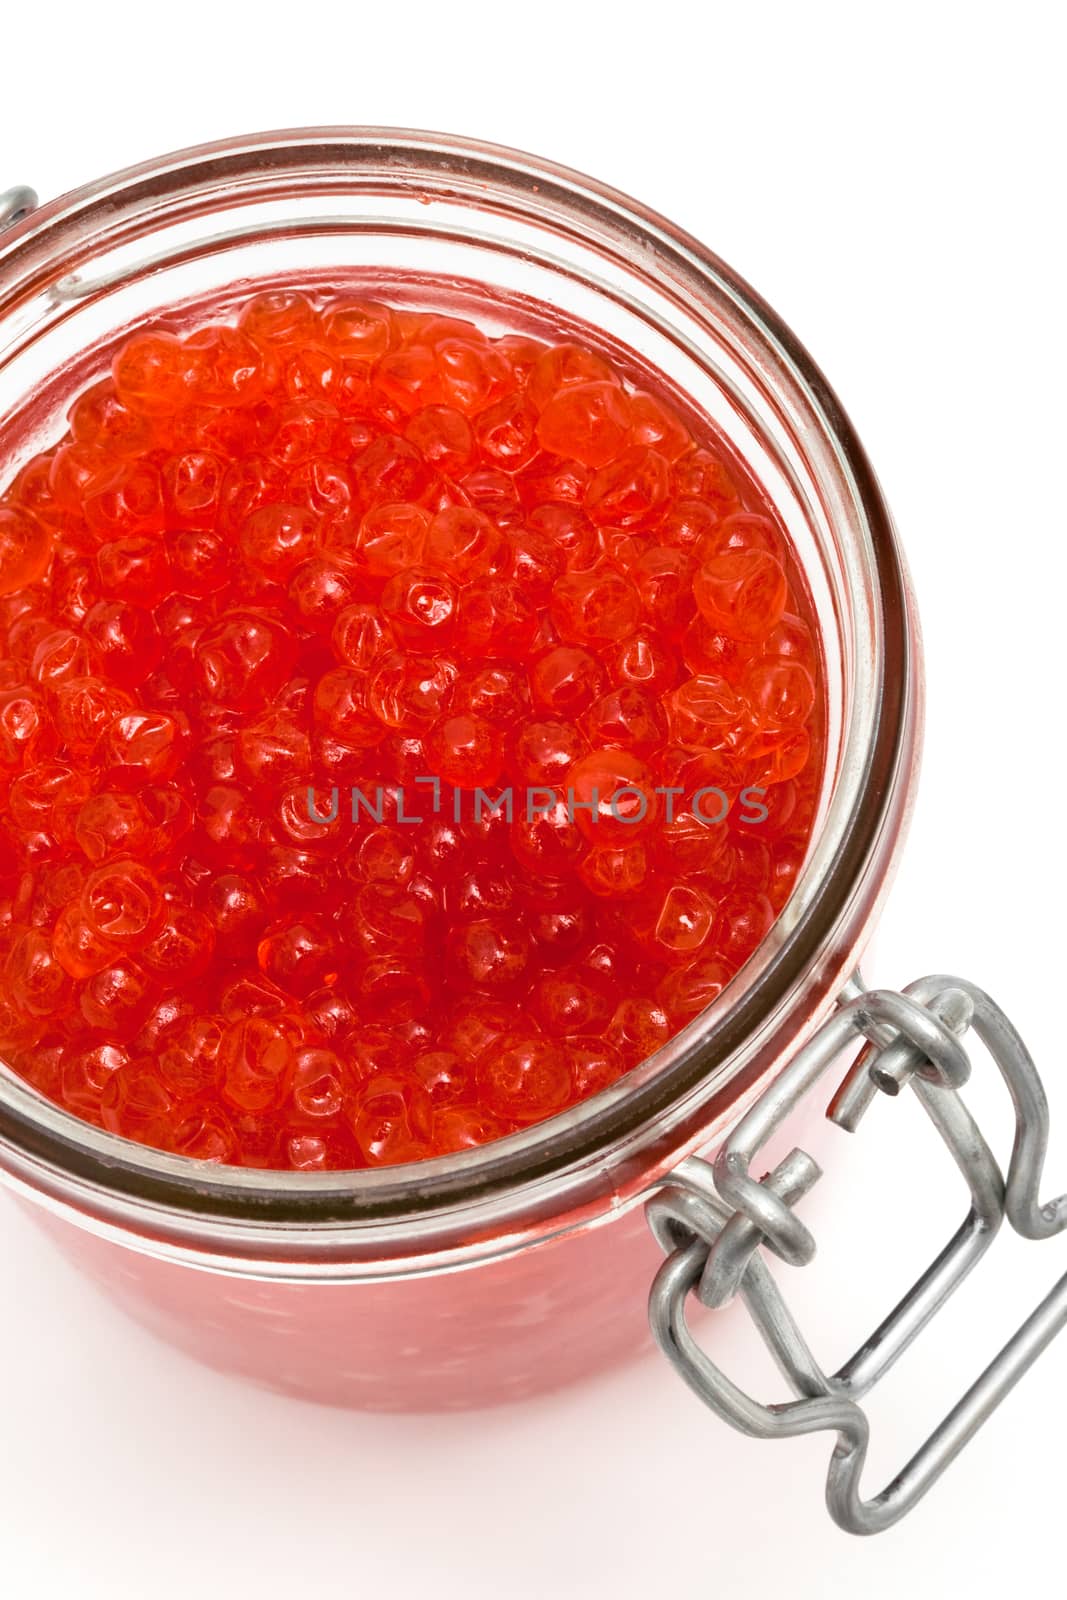 Red caviar in glass can on a white background